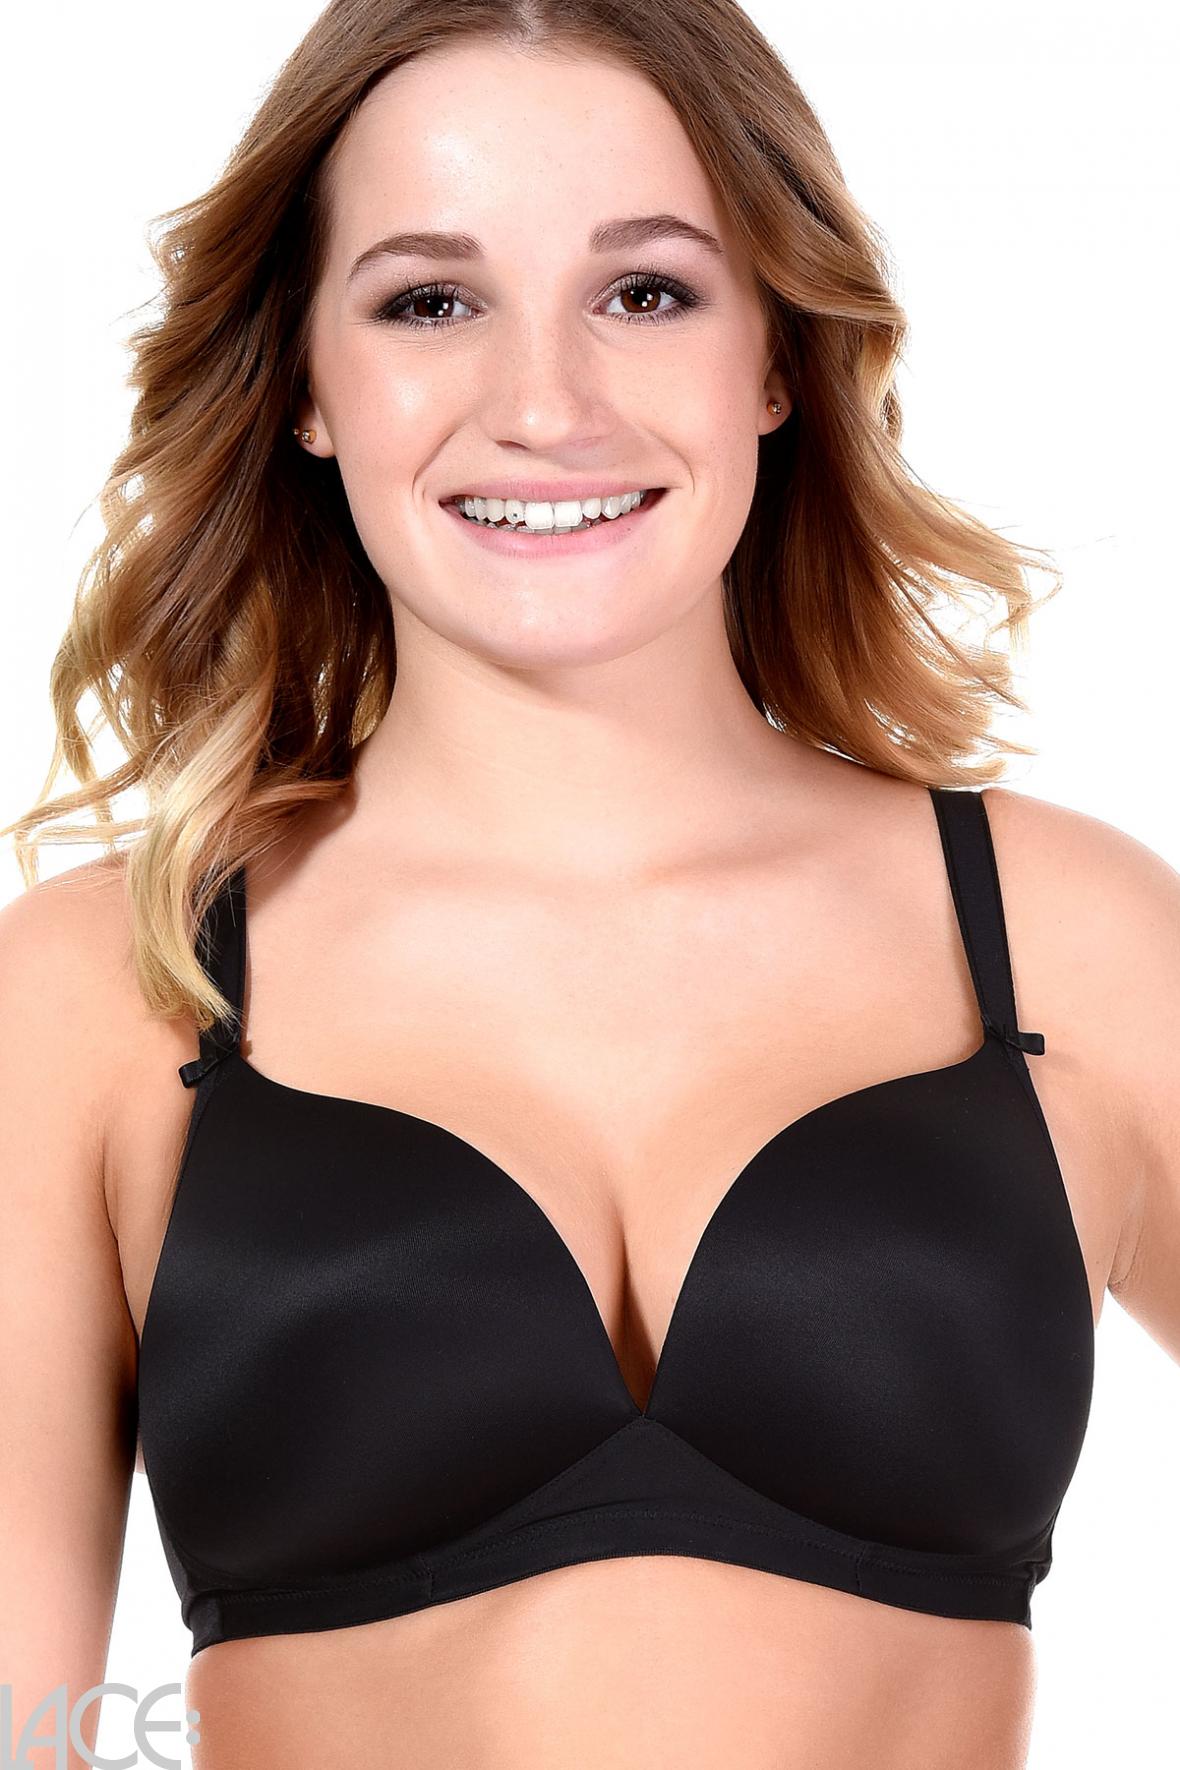 Freya Lingerie Deco Non-wired T-shirt bra E-G cup –